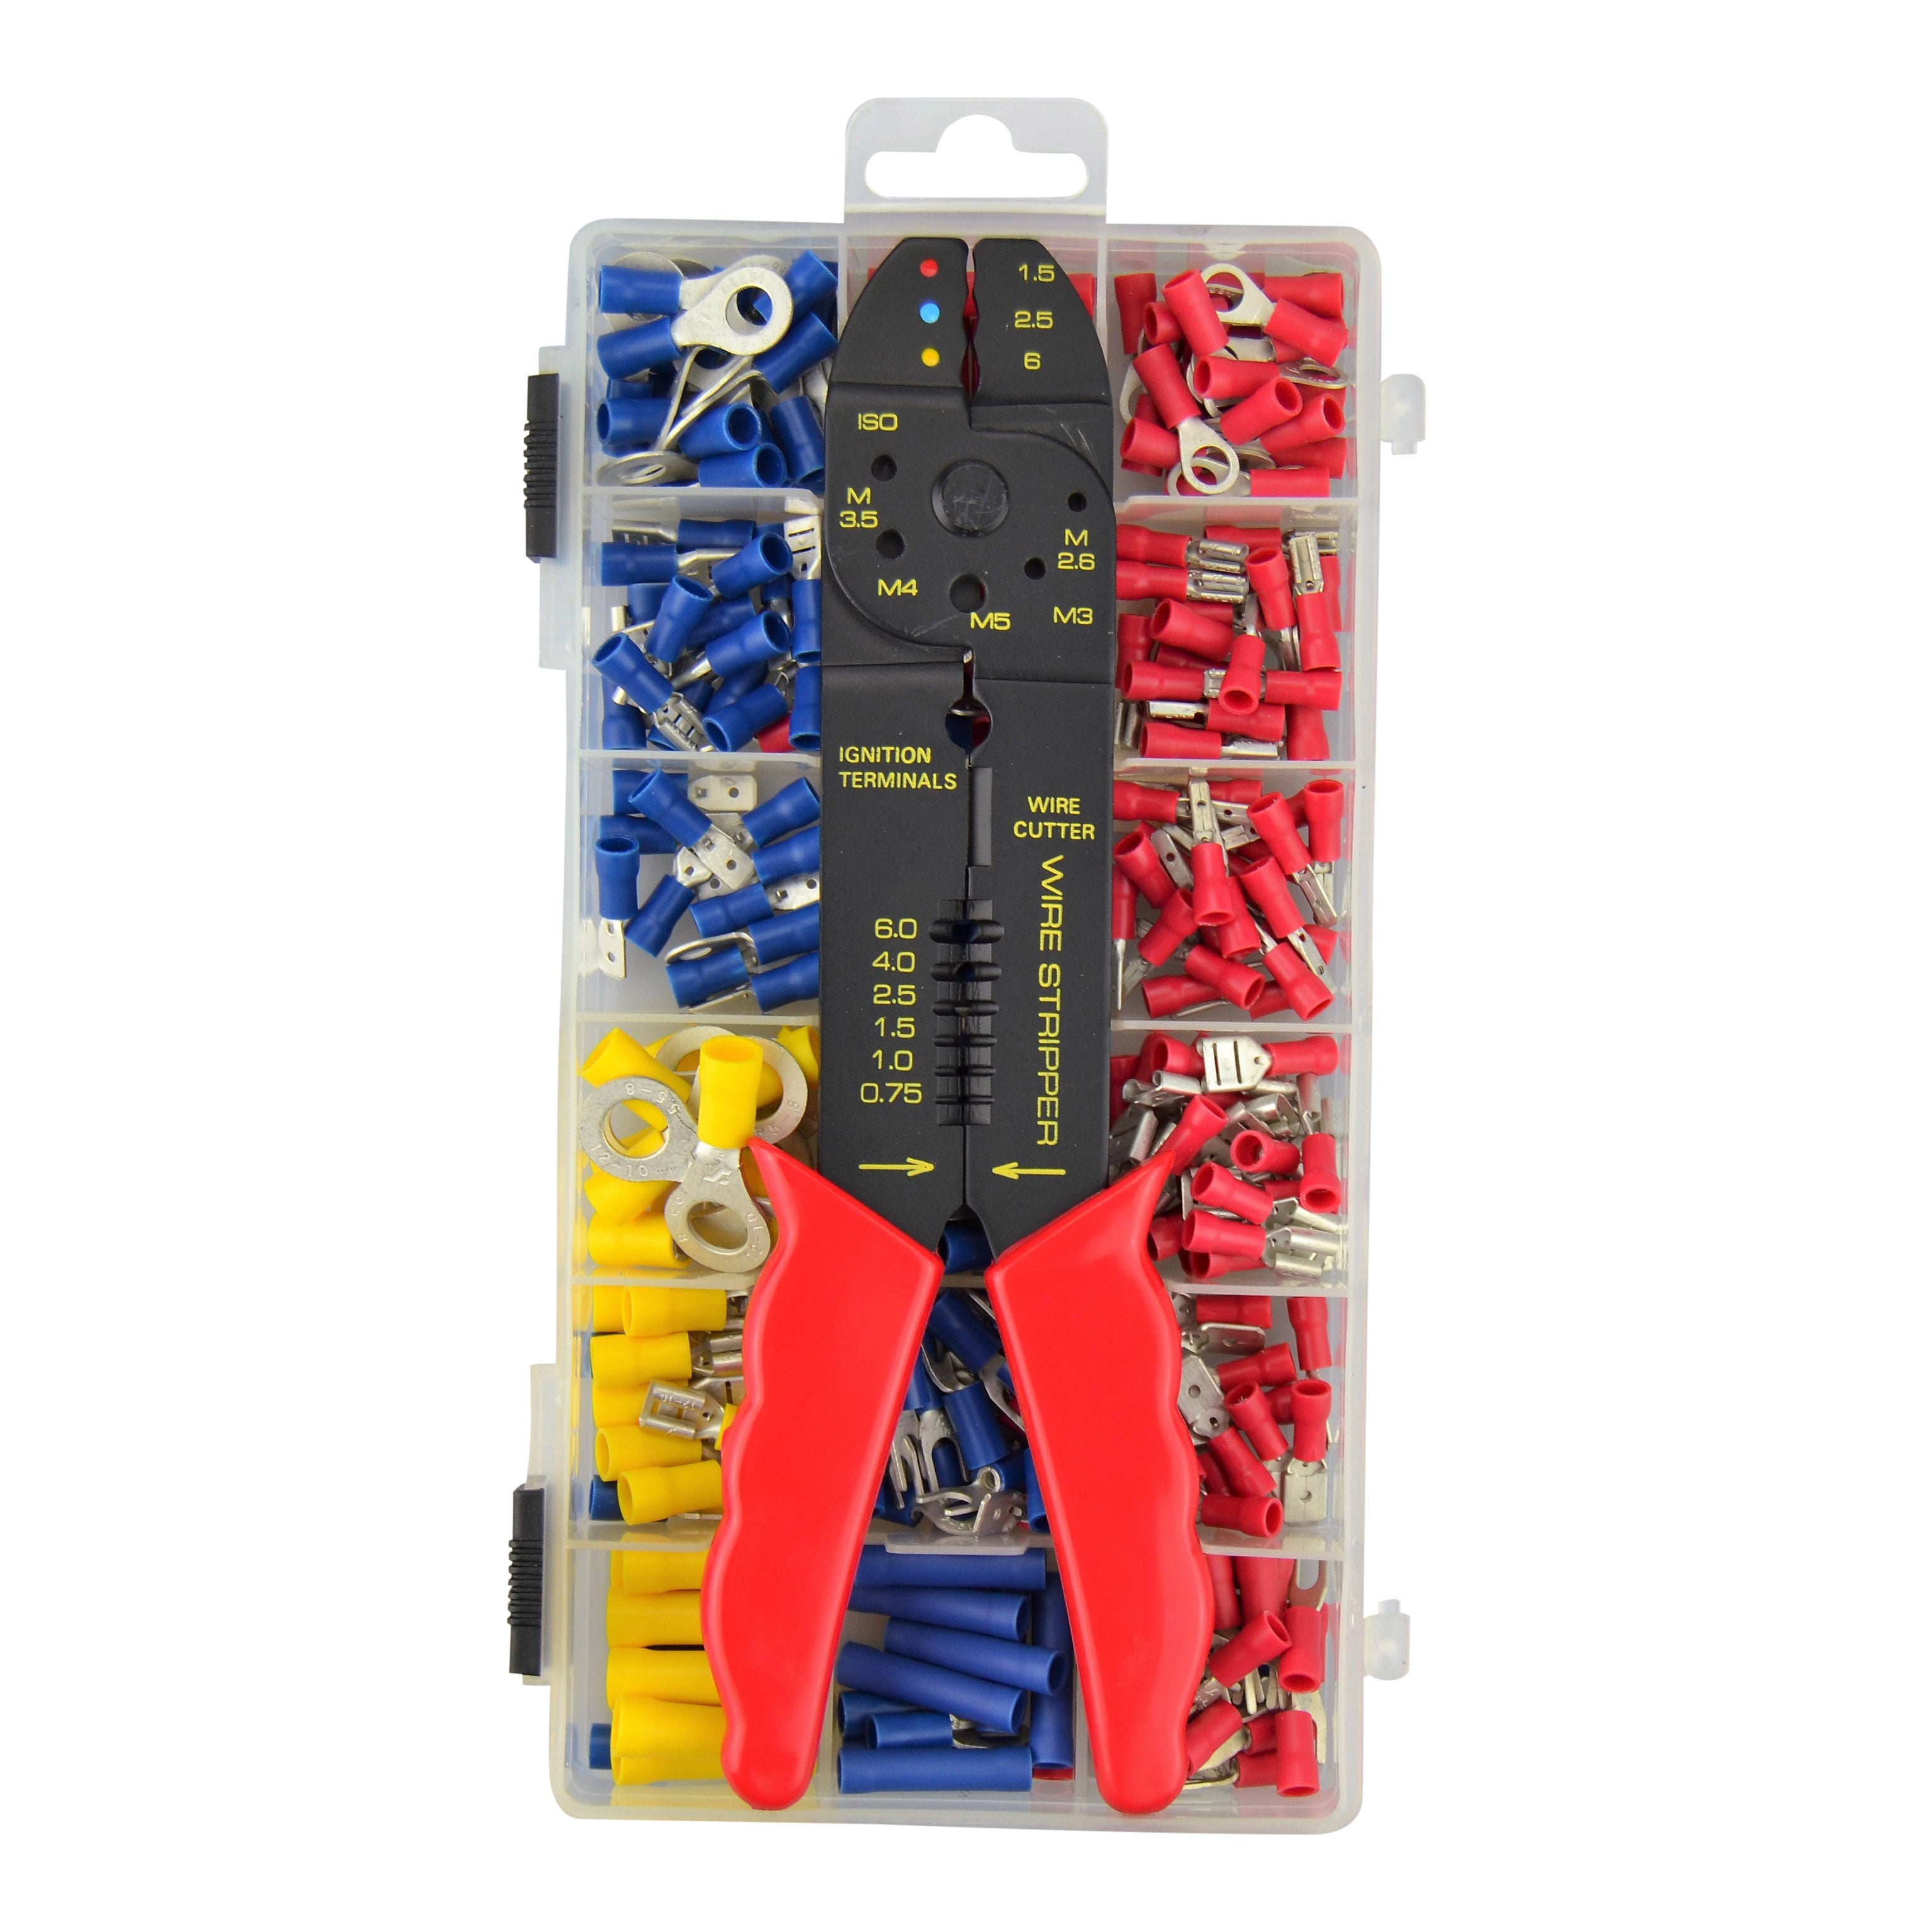 Red, Blue & Yellow Pre-Insulated Crimp Terminal Assortment Kit Including Budget Crimper, Cutter & Stripper Tool - 360pcs Total